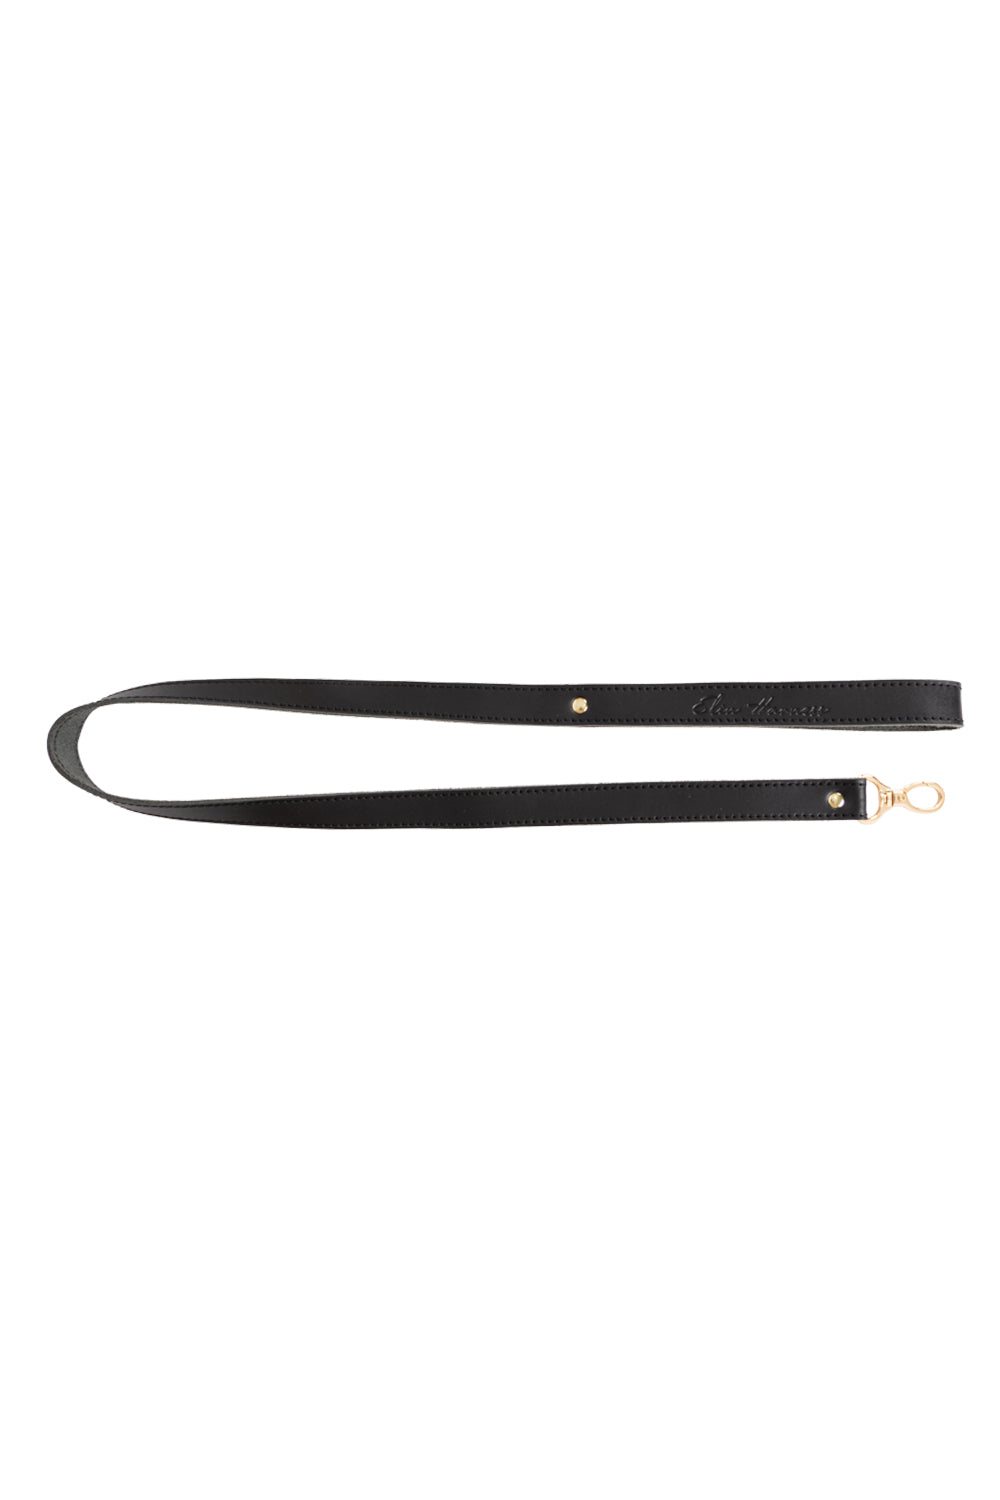 Leather leash. Gray